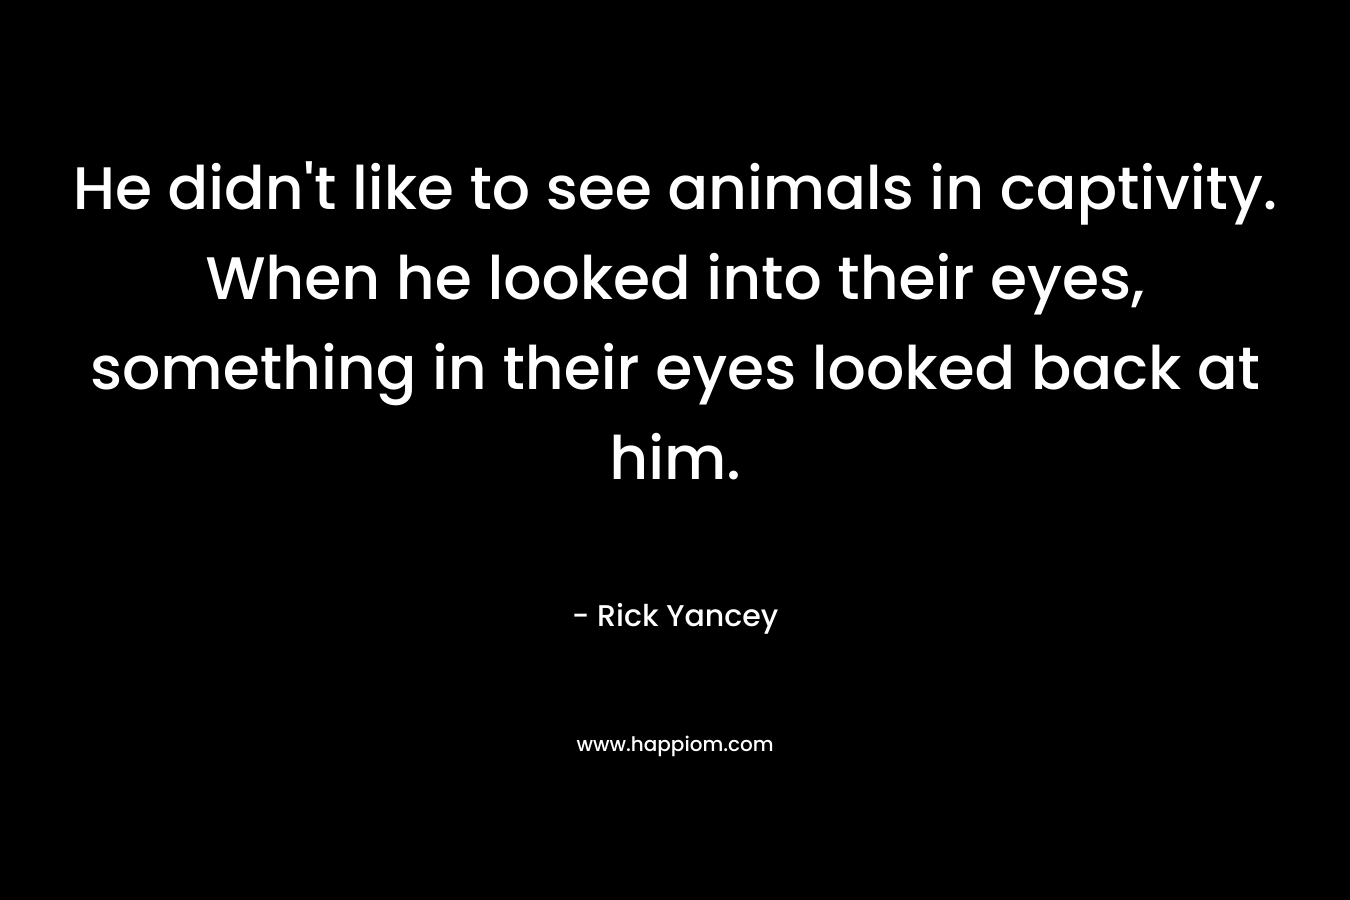 He didn't like to see animals in captivity. When he looked into their eyes, something in their eyes looked back at him.